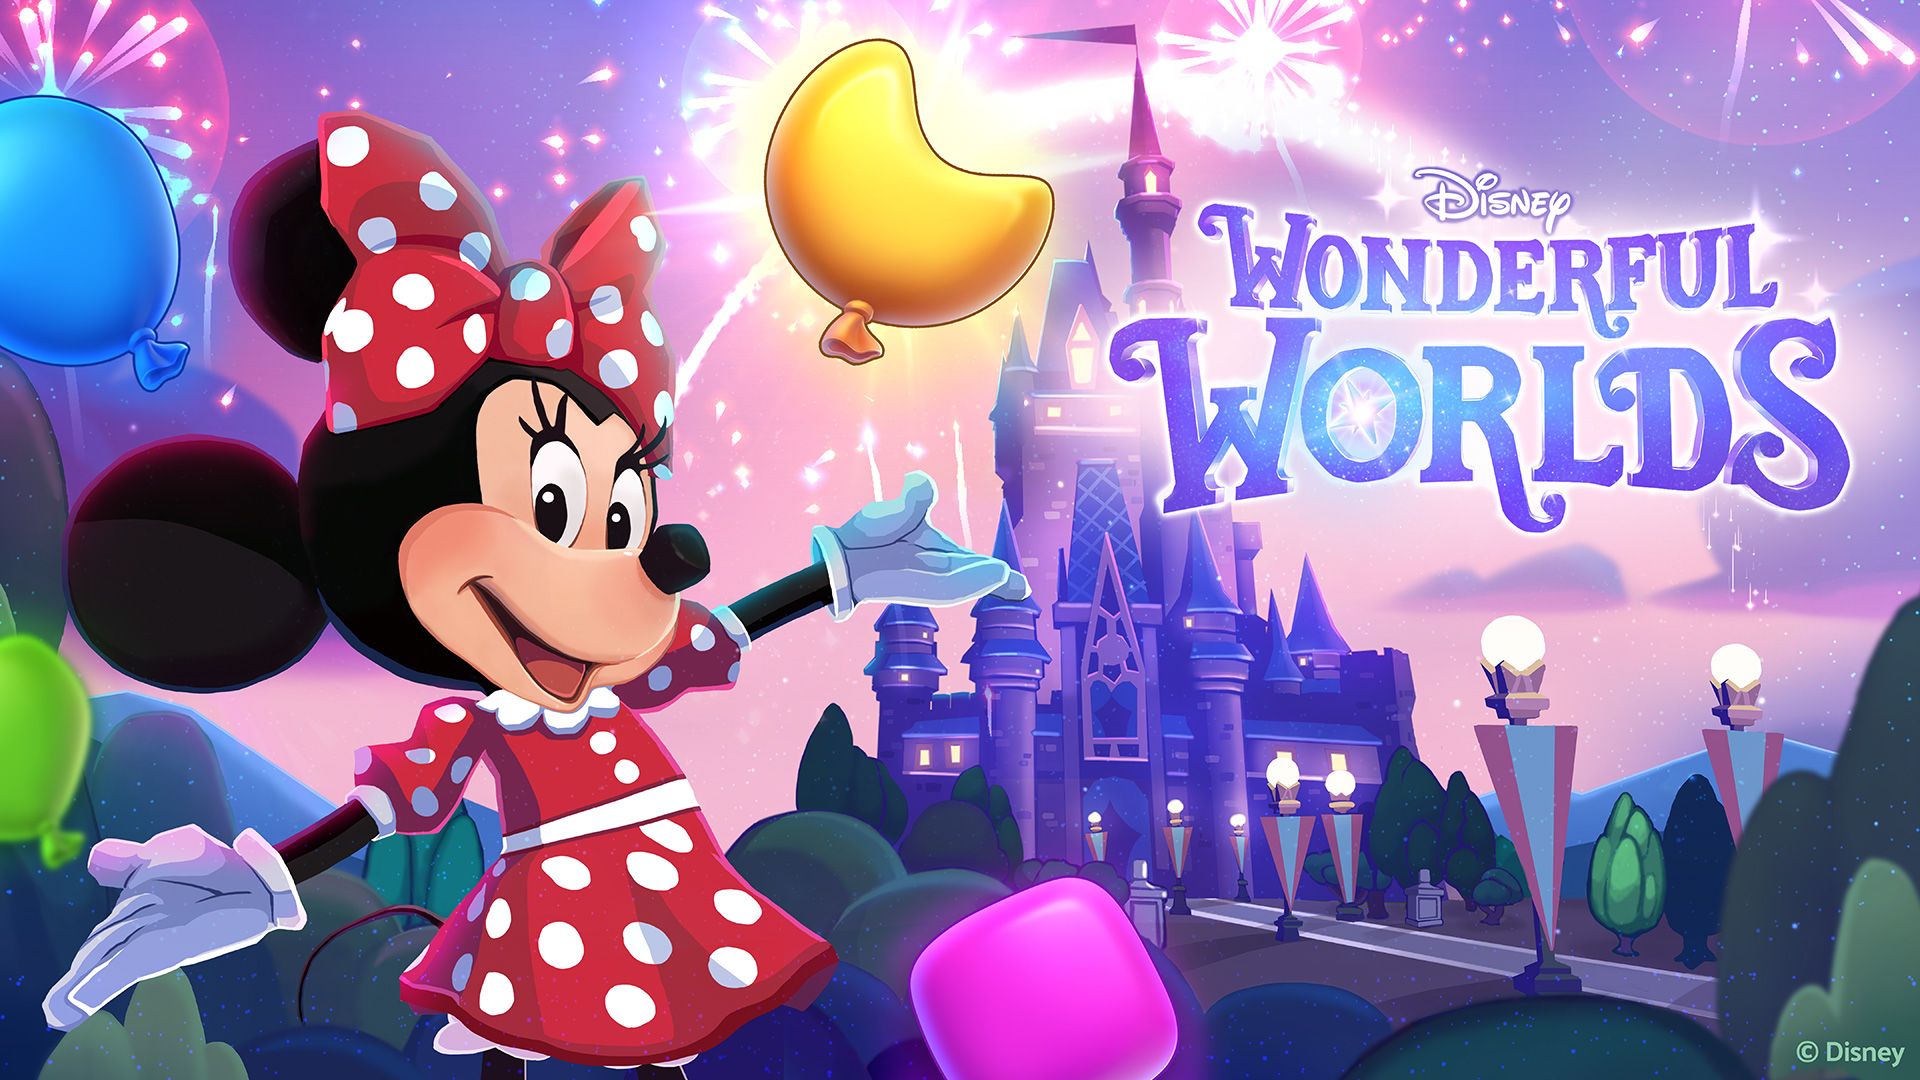 Coming soon an all new puzzle game for Disney fans… Disney Wonderful Worlds!